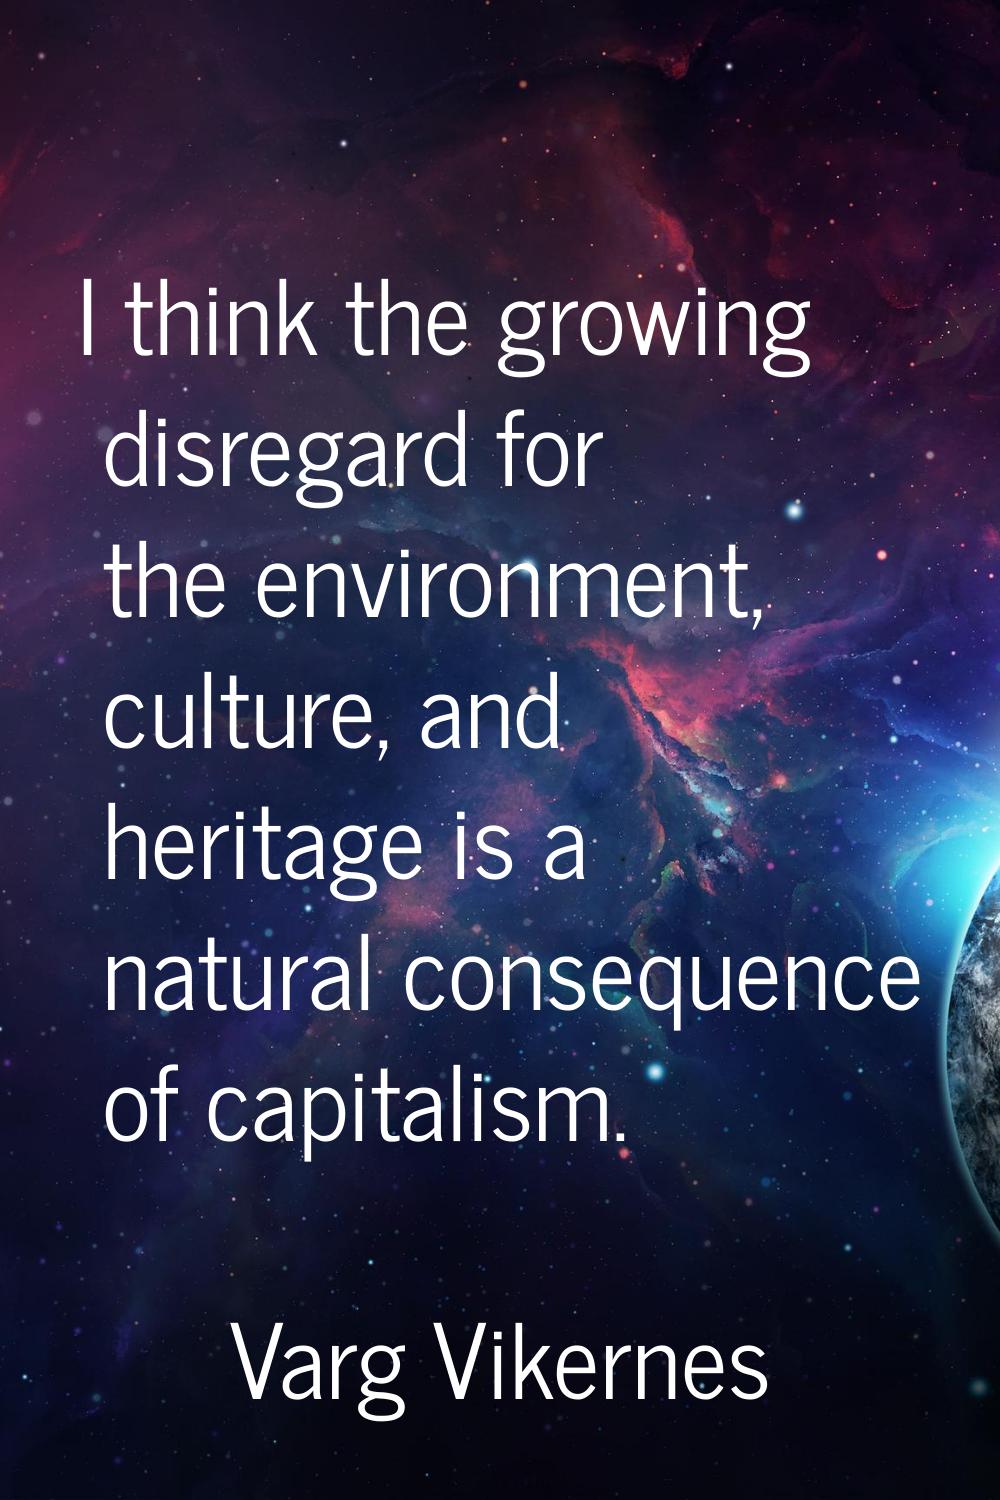 I think the growing disregard for the environment, culture, and heritage is a natural consequence o